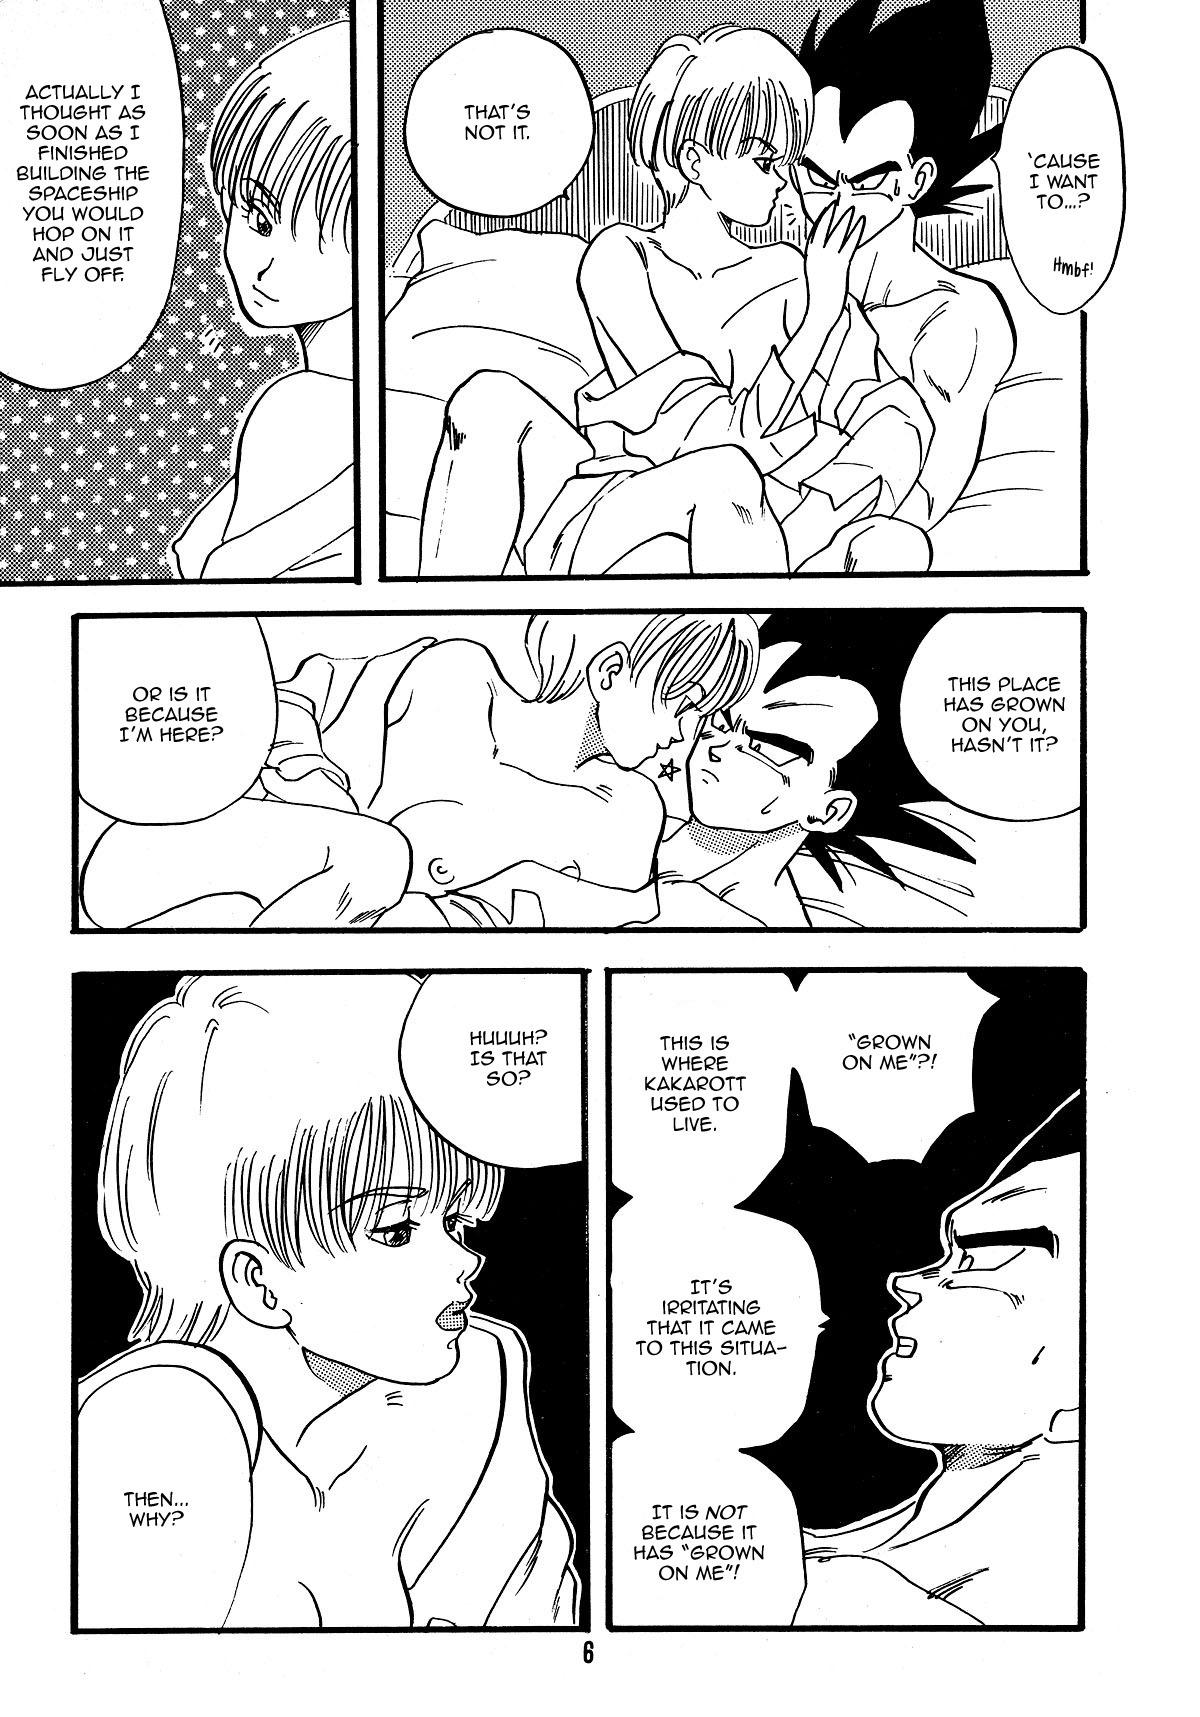 Fingers Erotic Flame - Dragon ball z Sexcam - Page 7